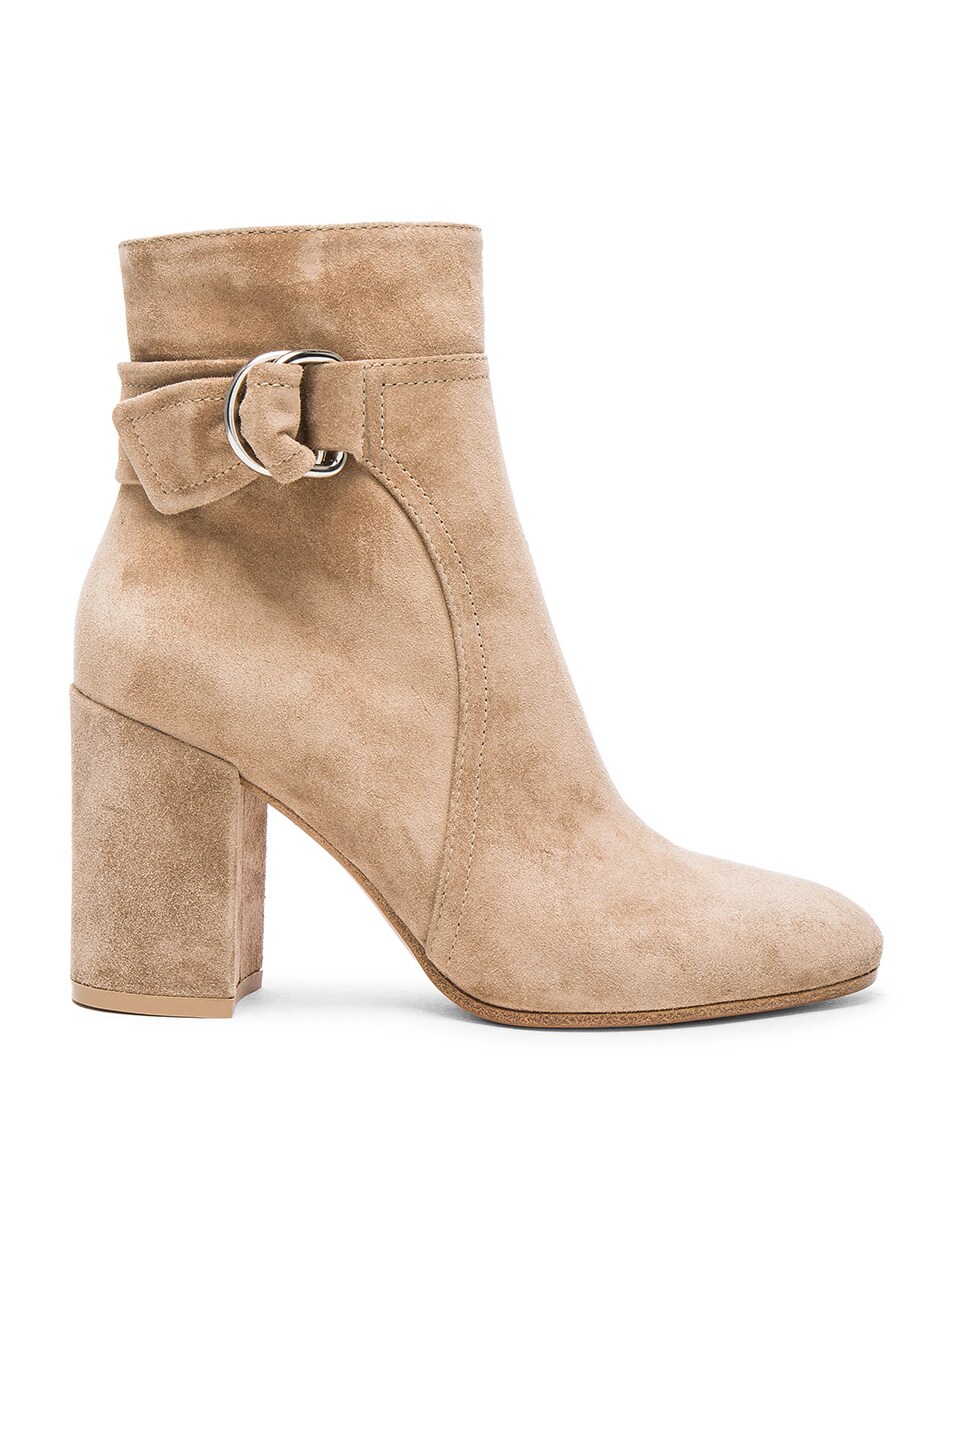 Image 1 of Gianvito Rossi Suede Belted Ankle Boots in Bisque